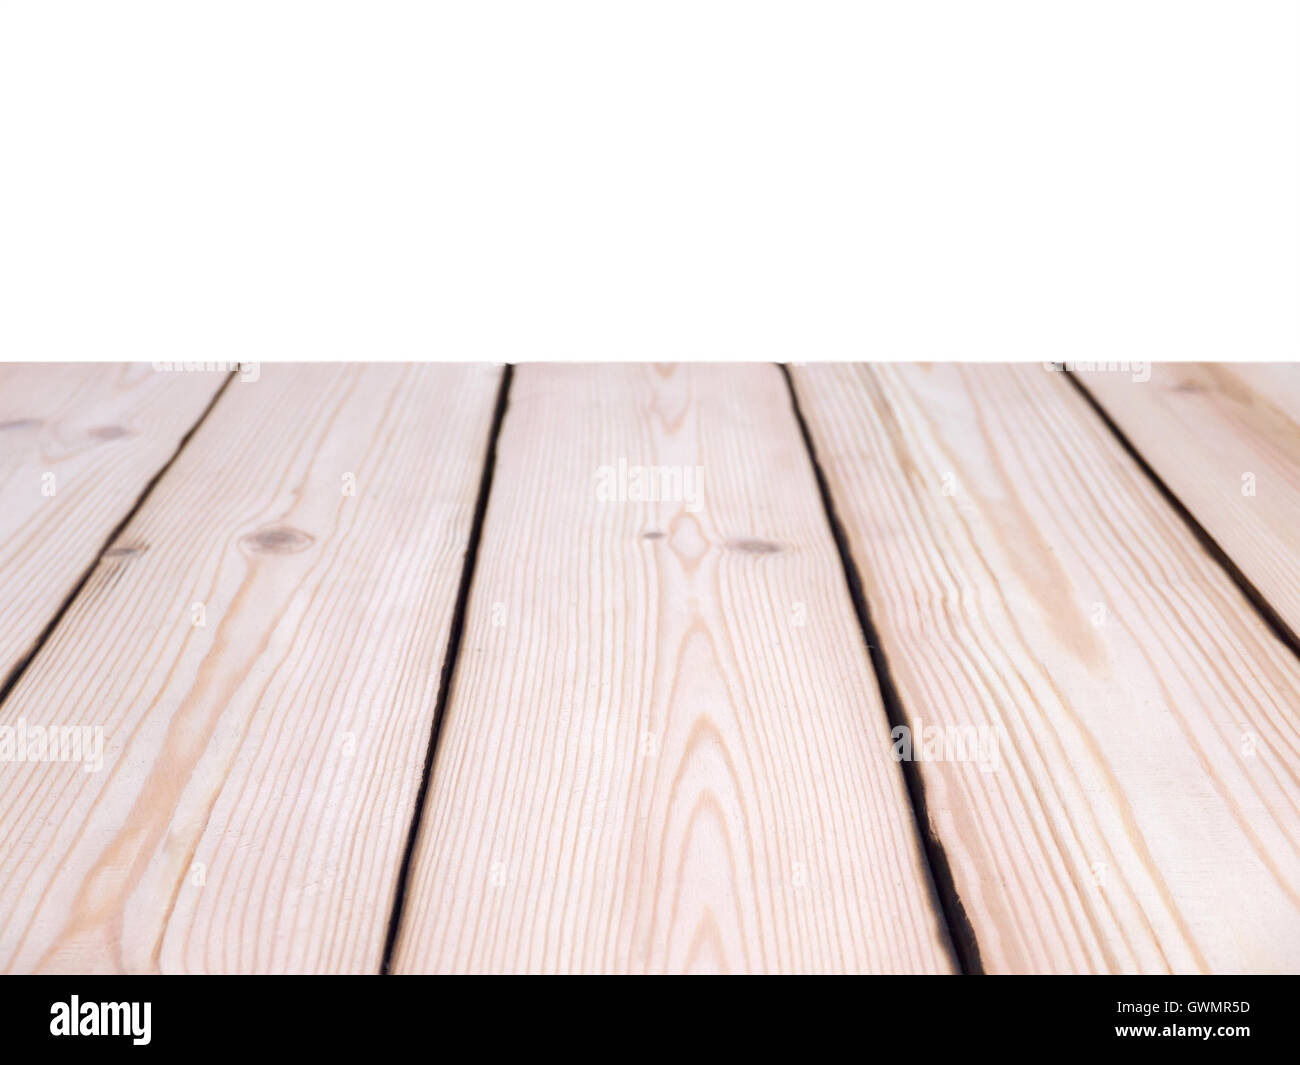 Rough planed pine planks perspective background isolated on white Stock Photo